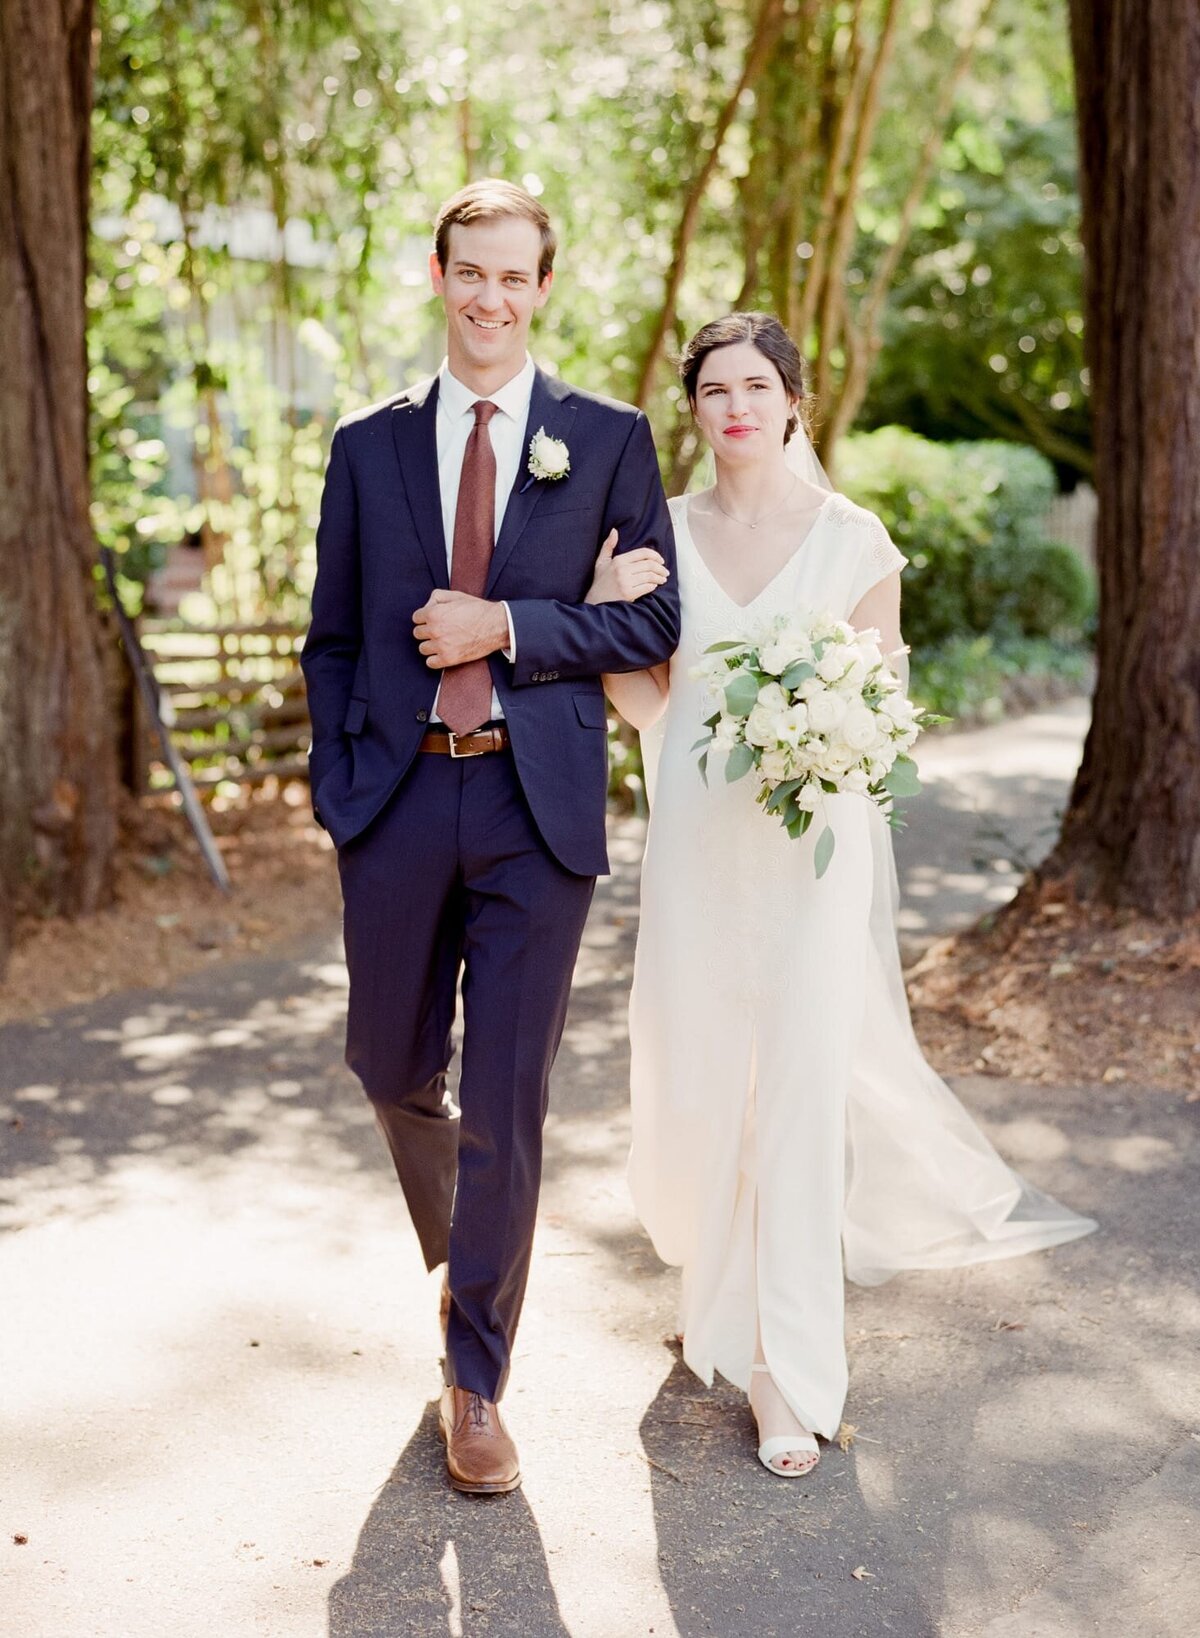 A proud groom walks his wife through the woods after an impressive forest wedding.